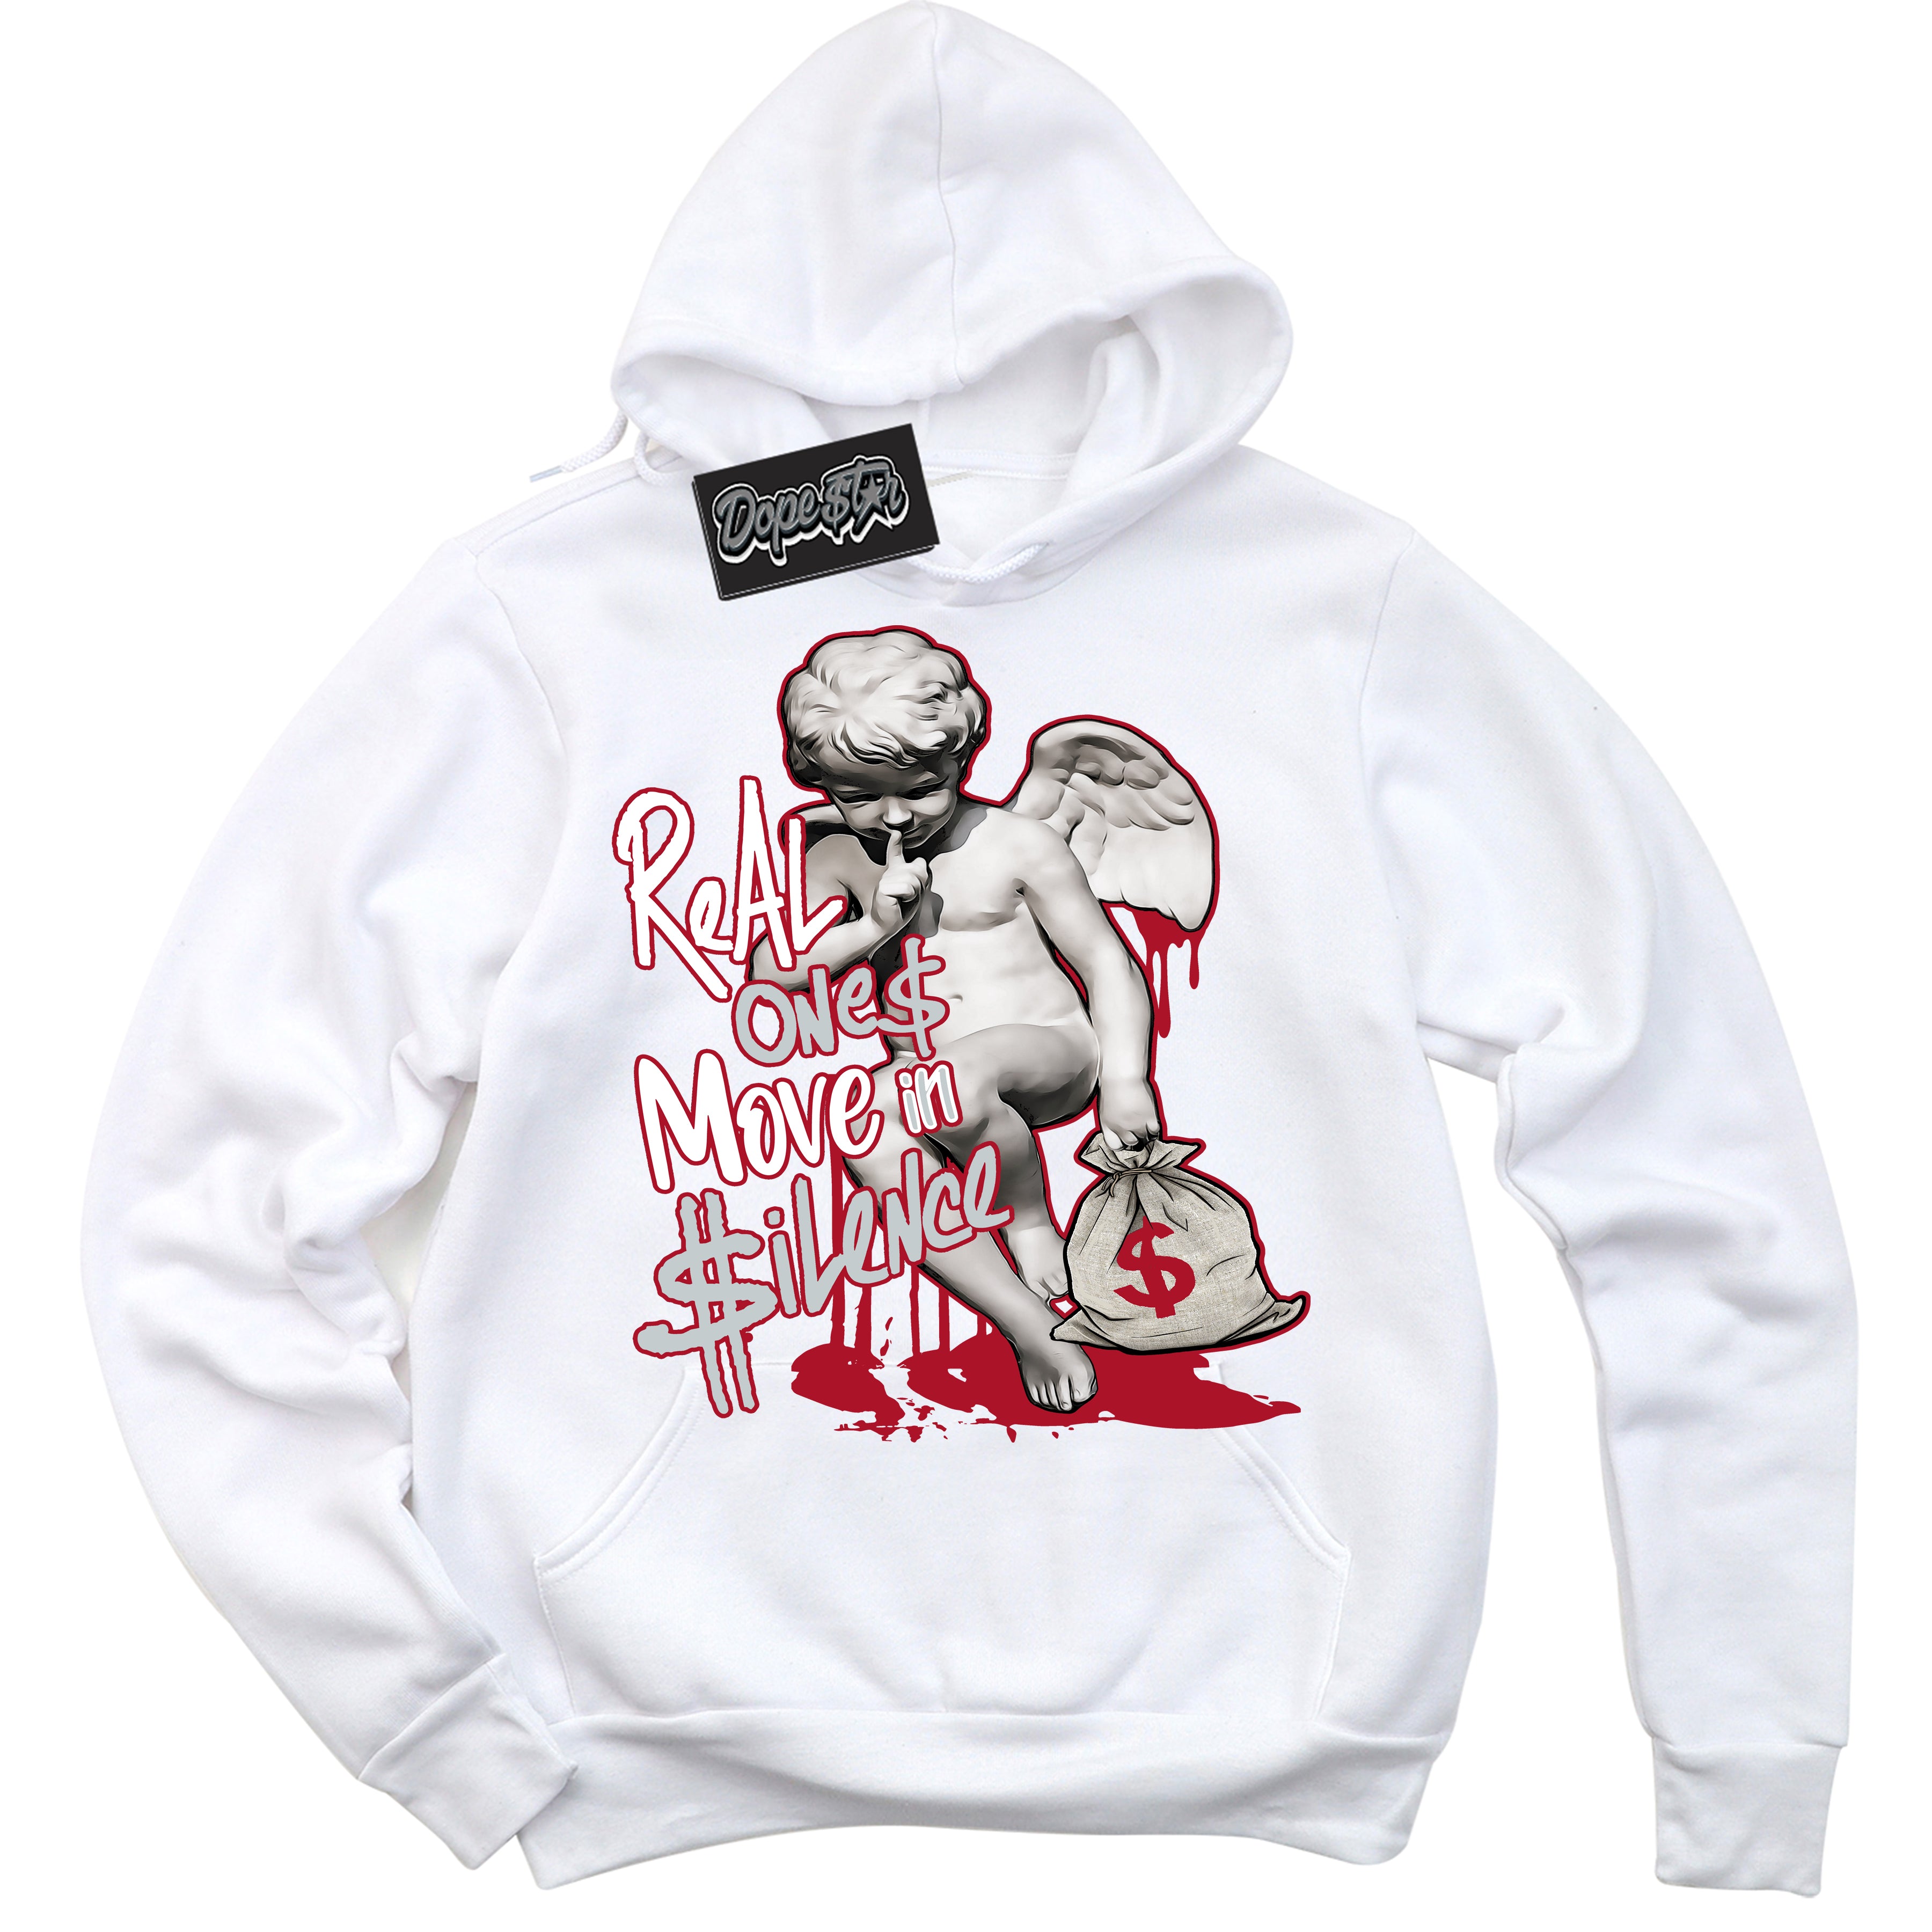 Cool White Hoodie with “ Real Ones Cherub ”  design that Perfectly Matches  Reverse Ultraman Sneakers.